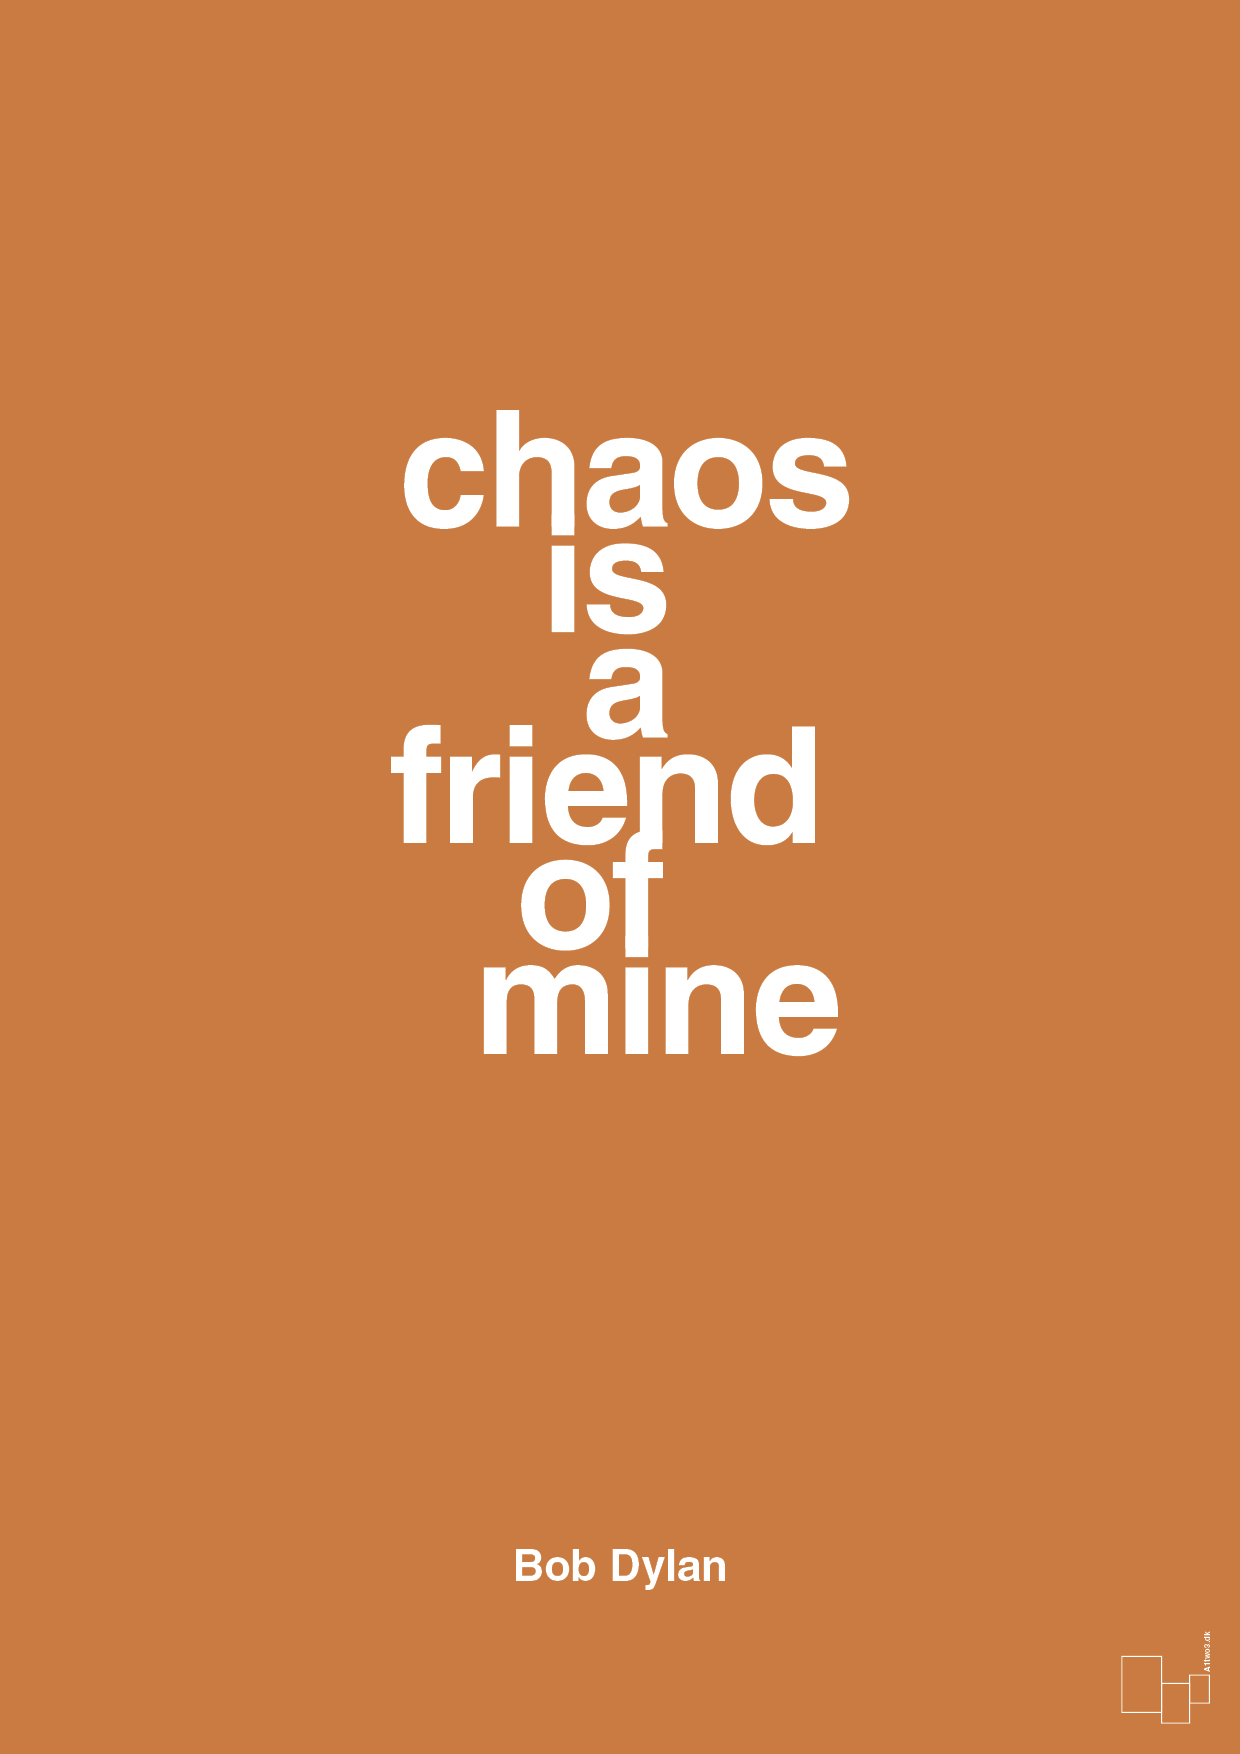 chaos is a friend of mine - Plakat med Citater i Rumba Orange